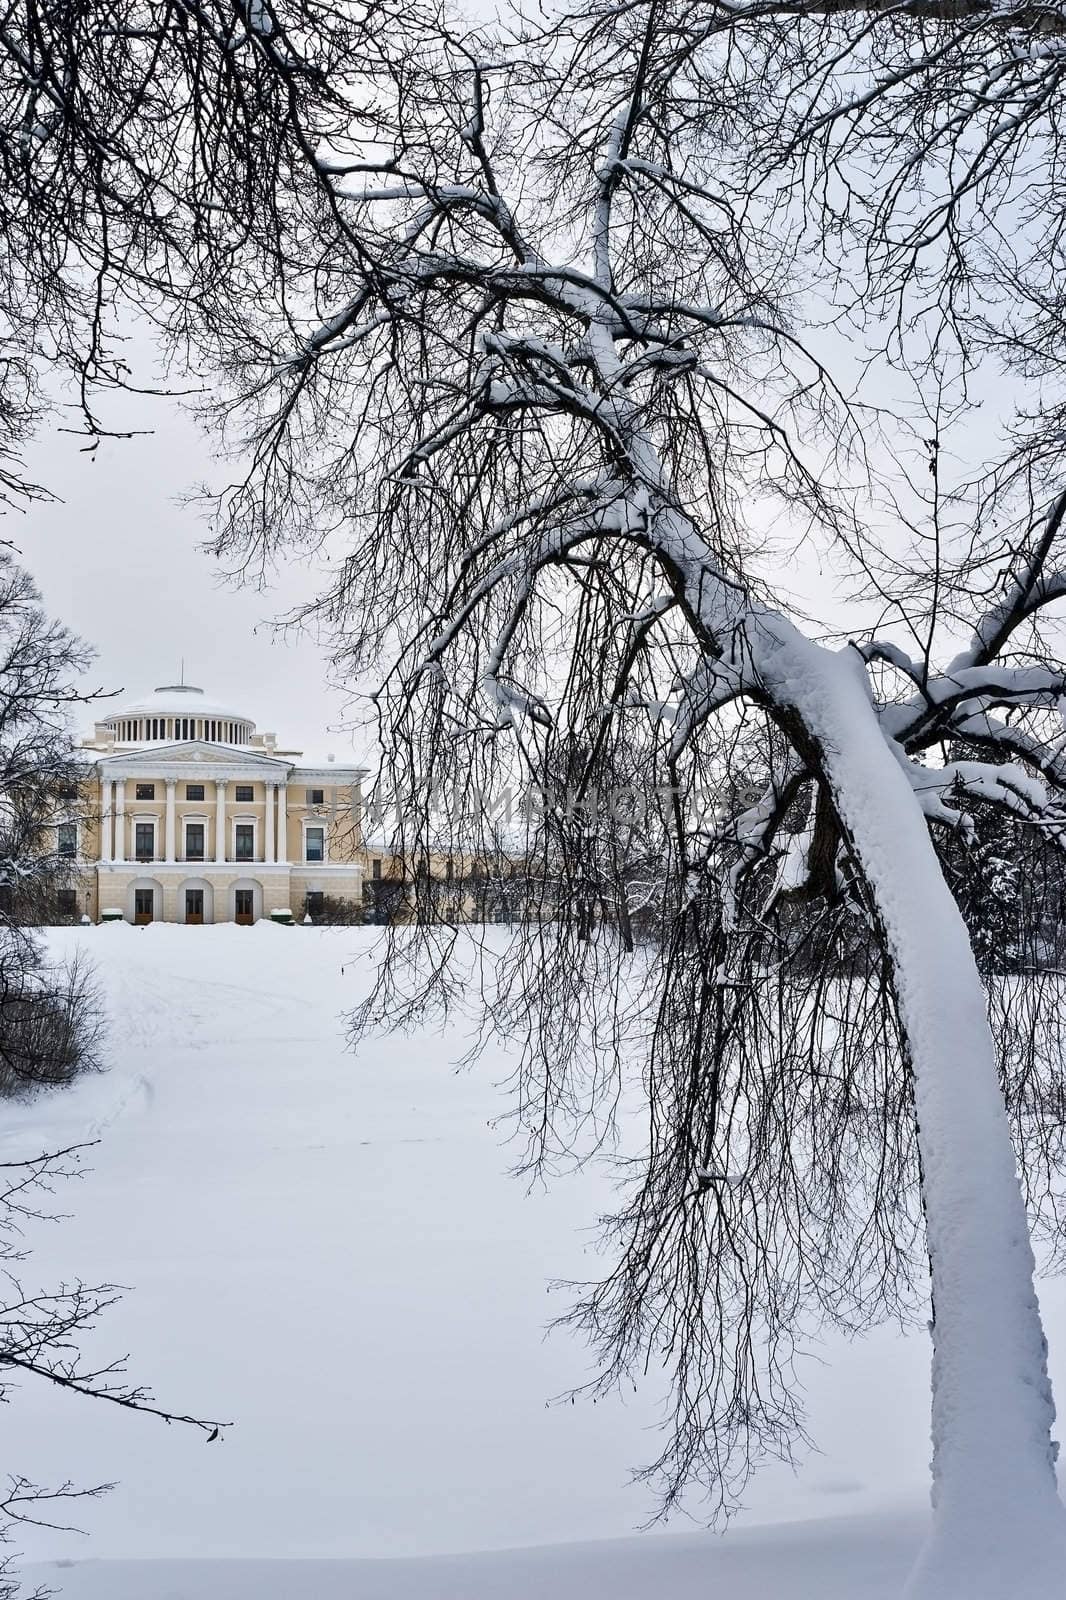 Classical building and picturesque tree in winter park